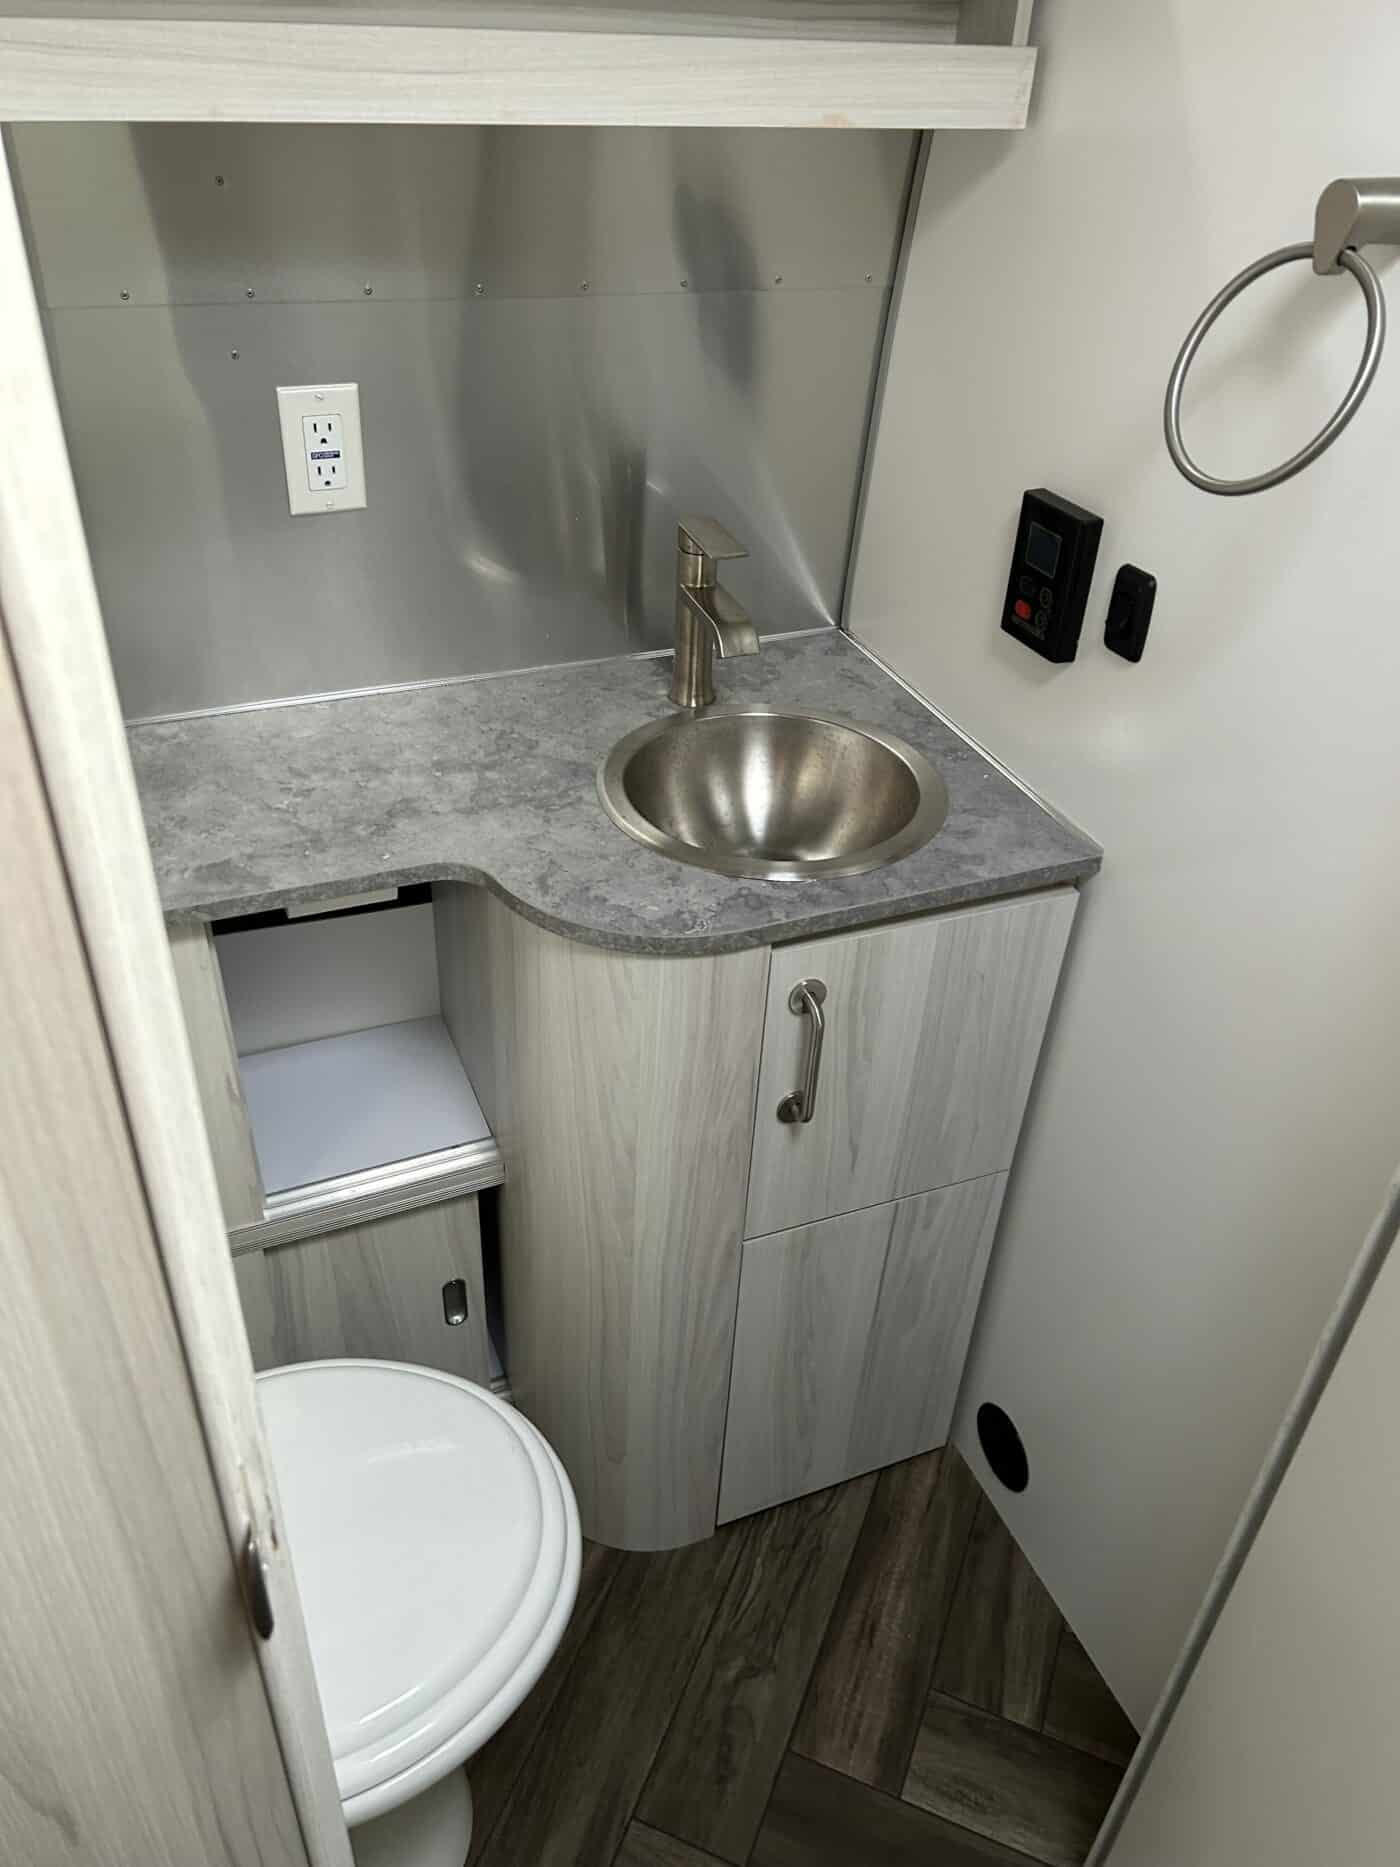 2022 28FT International For Sale In Eugene, Oregon - Airstream Marketplace